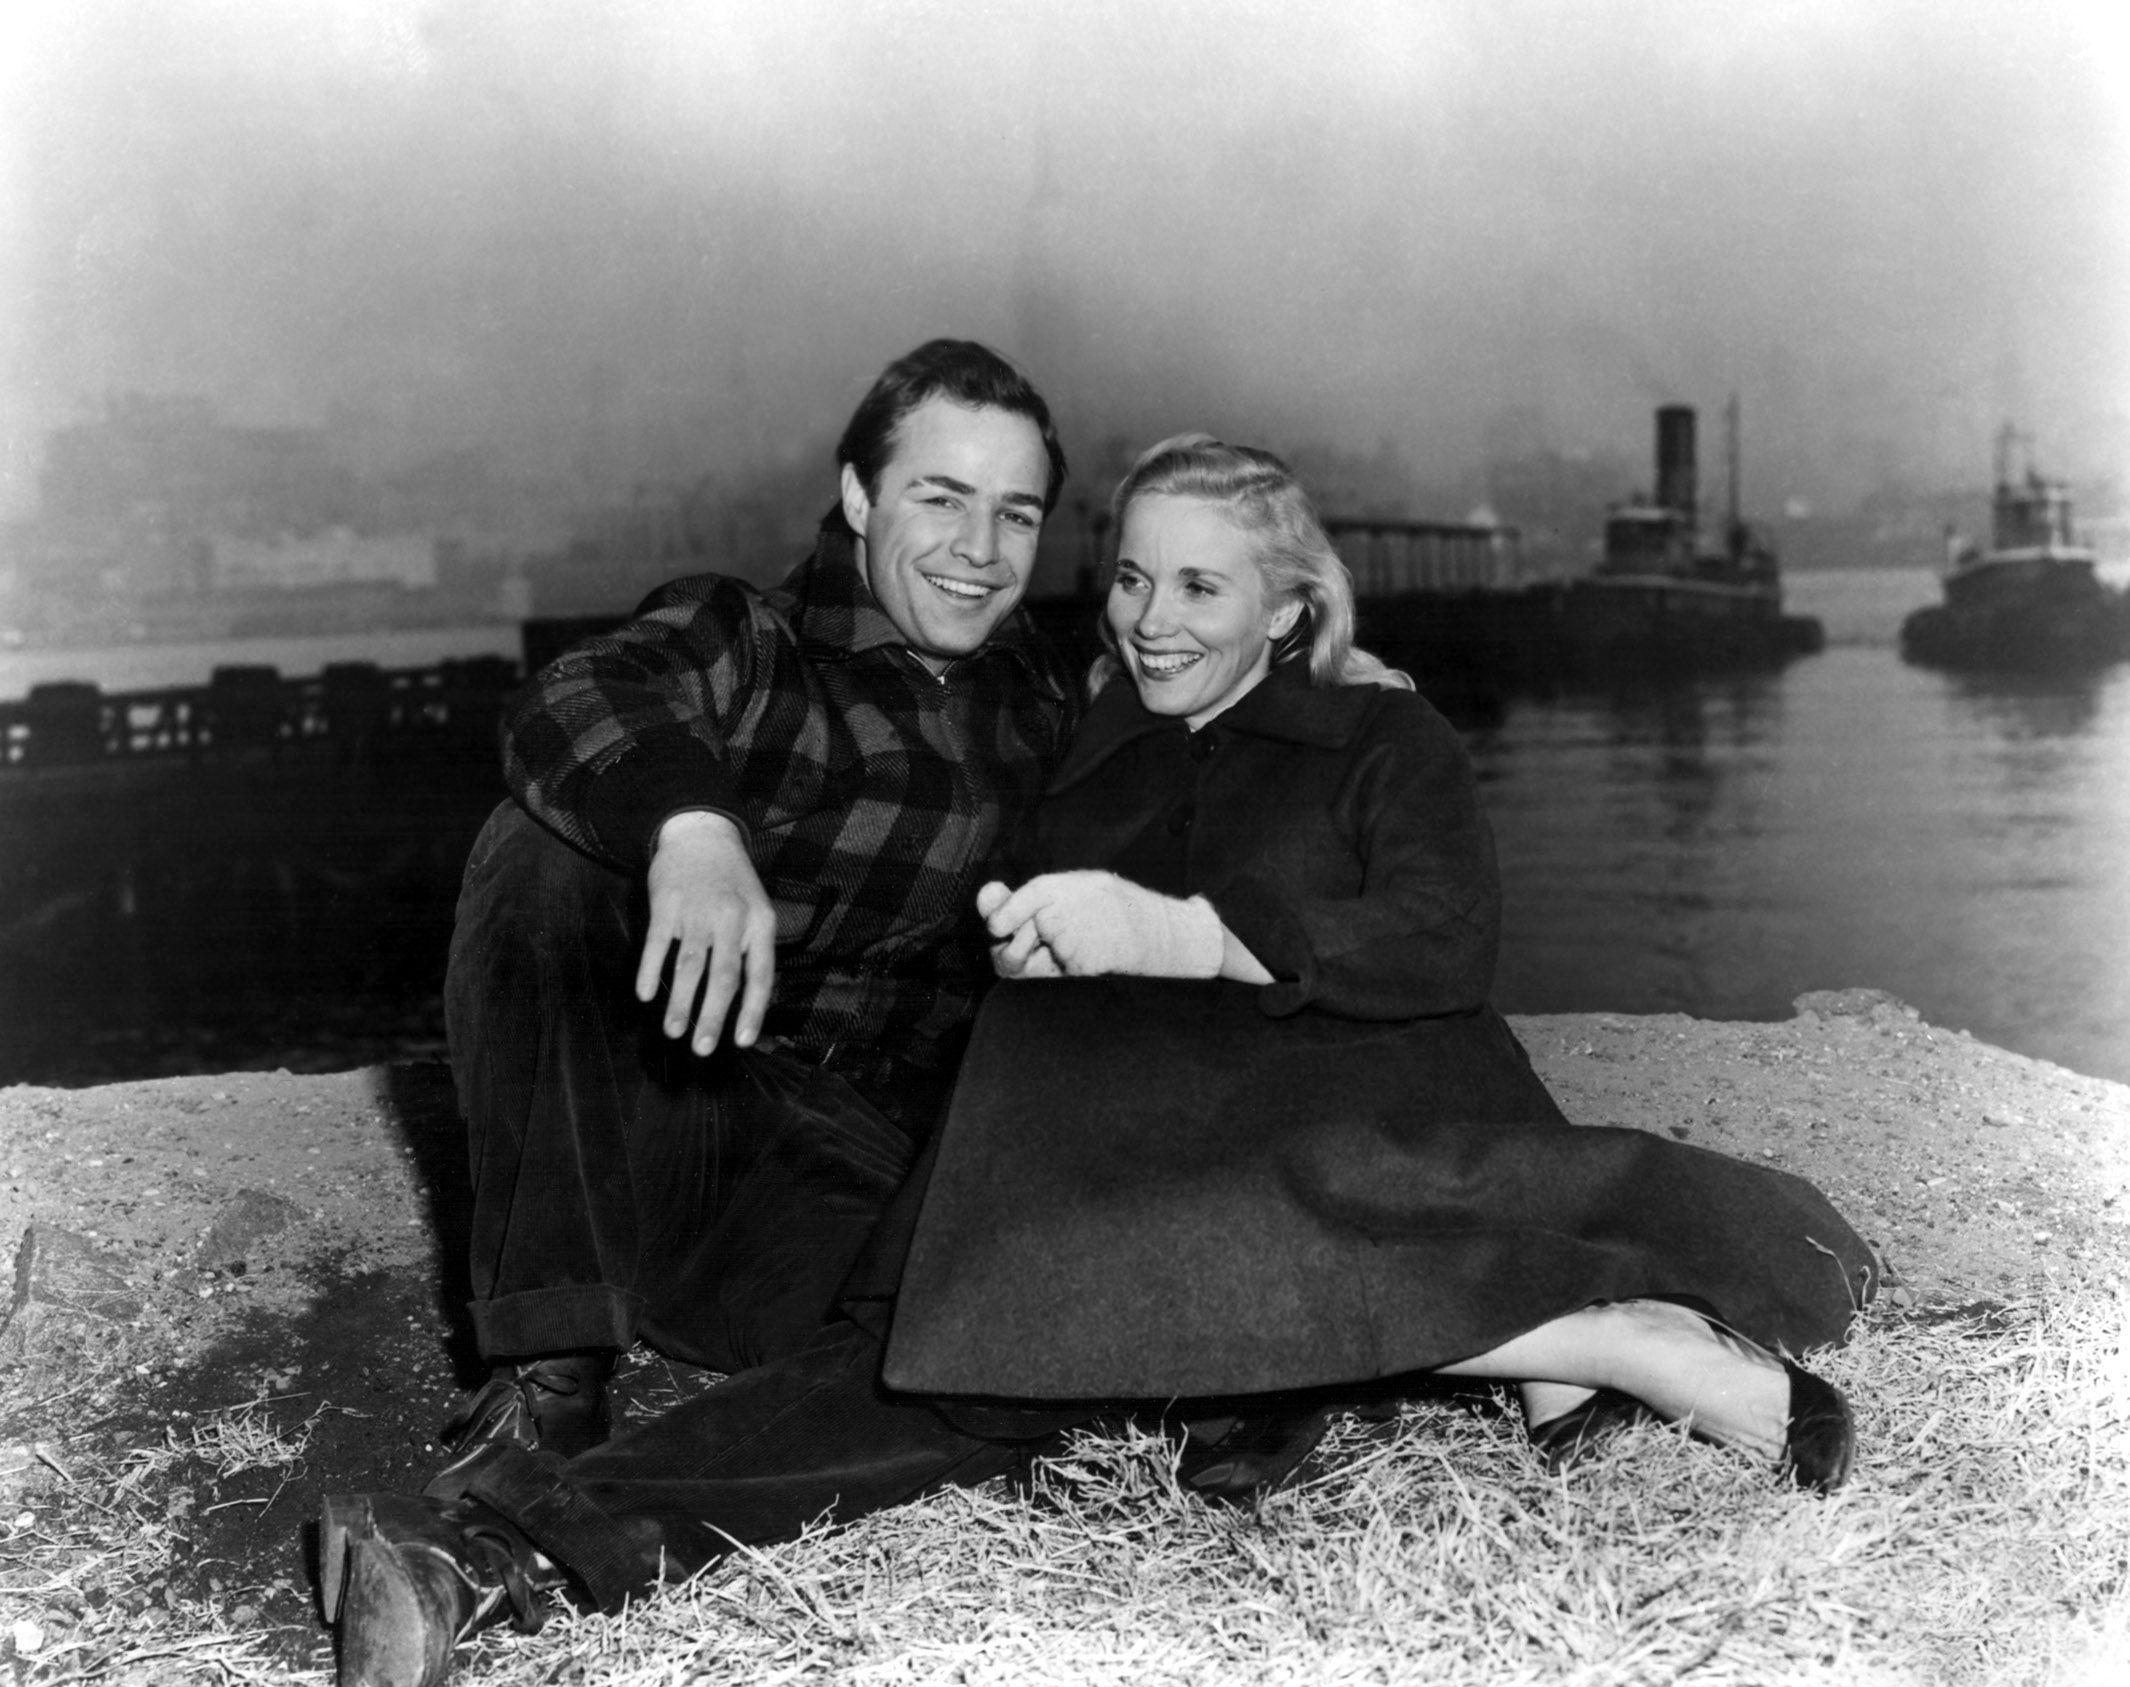 Marlon Brando and Eva Marie Saint during the filming of On